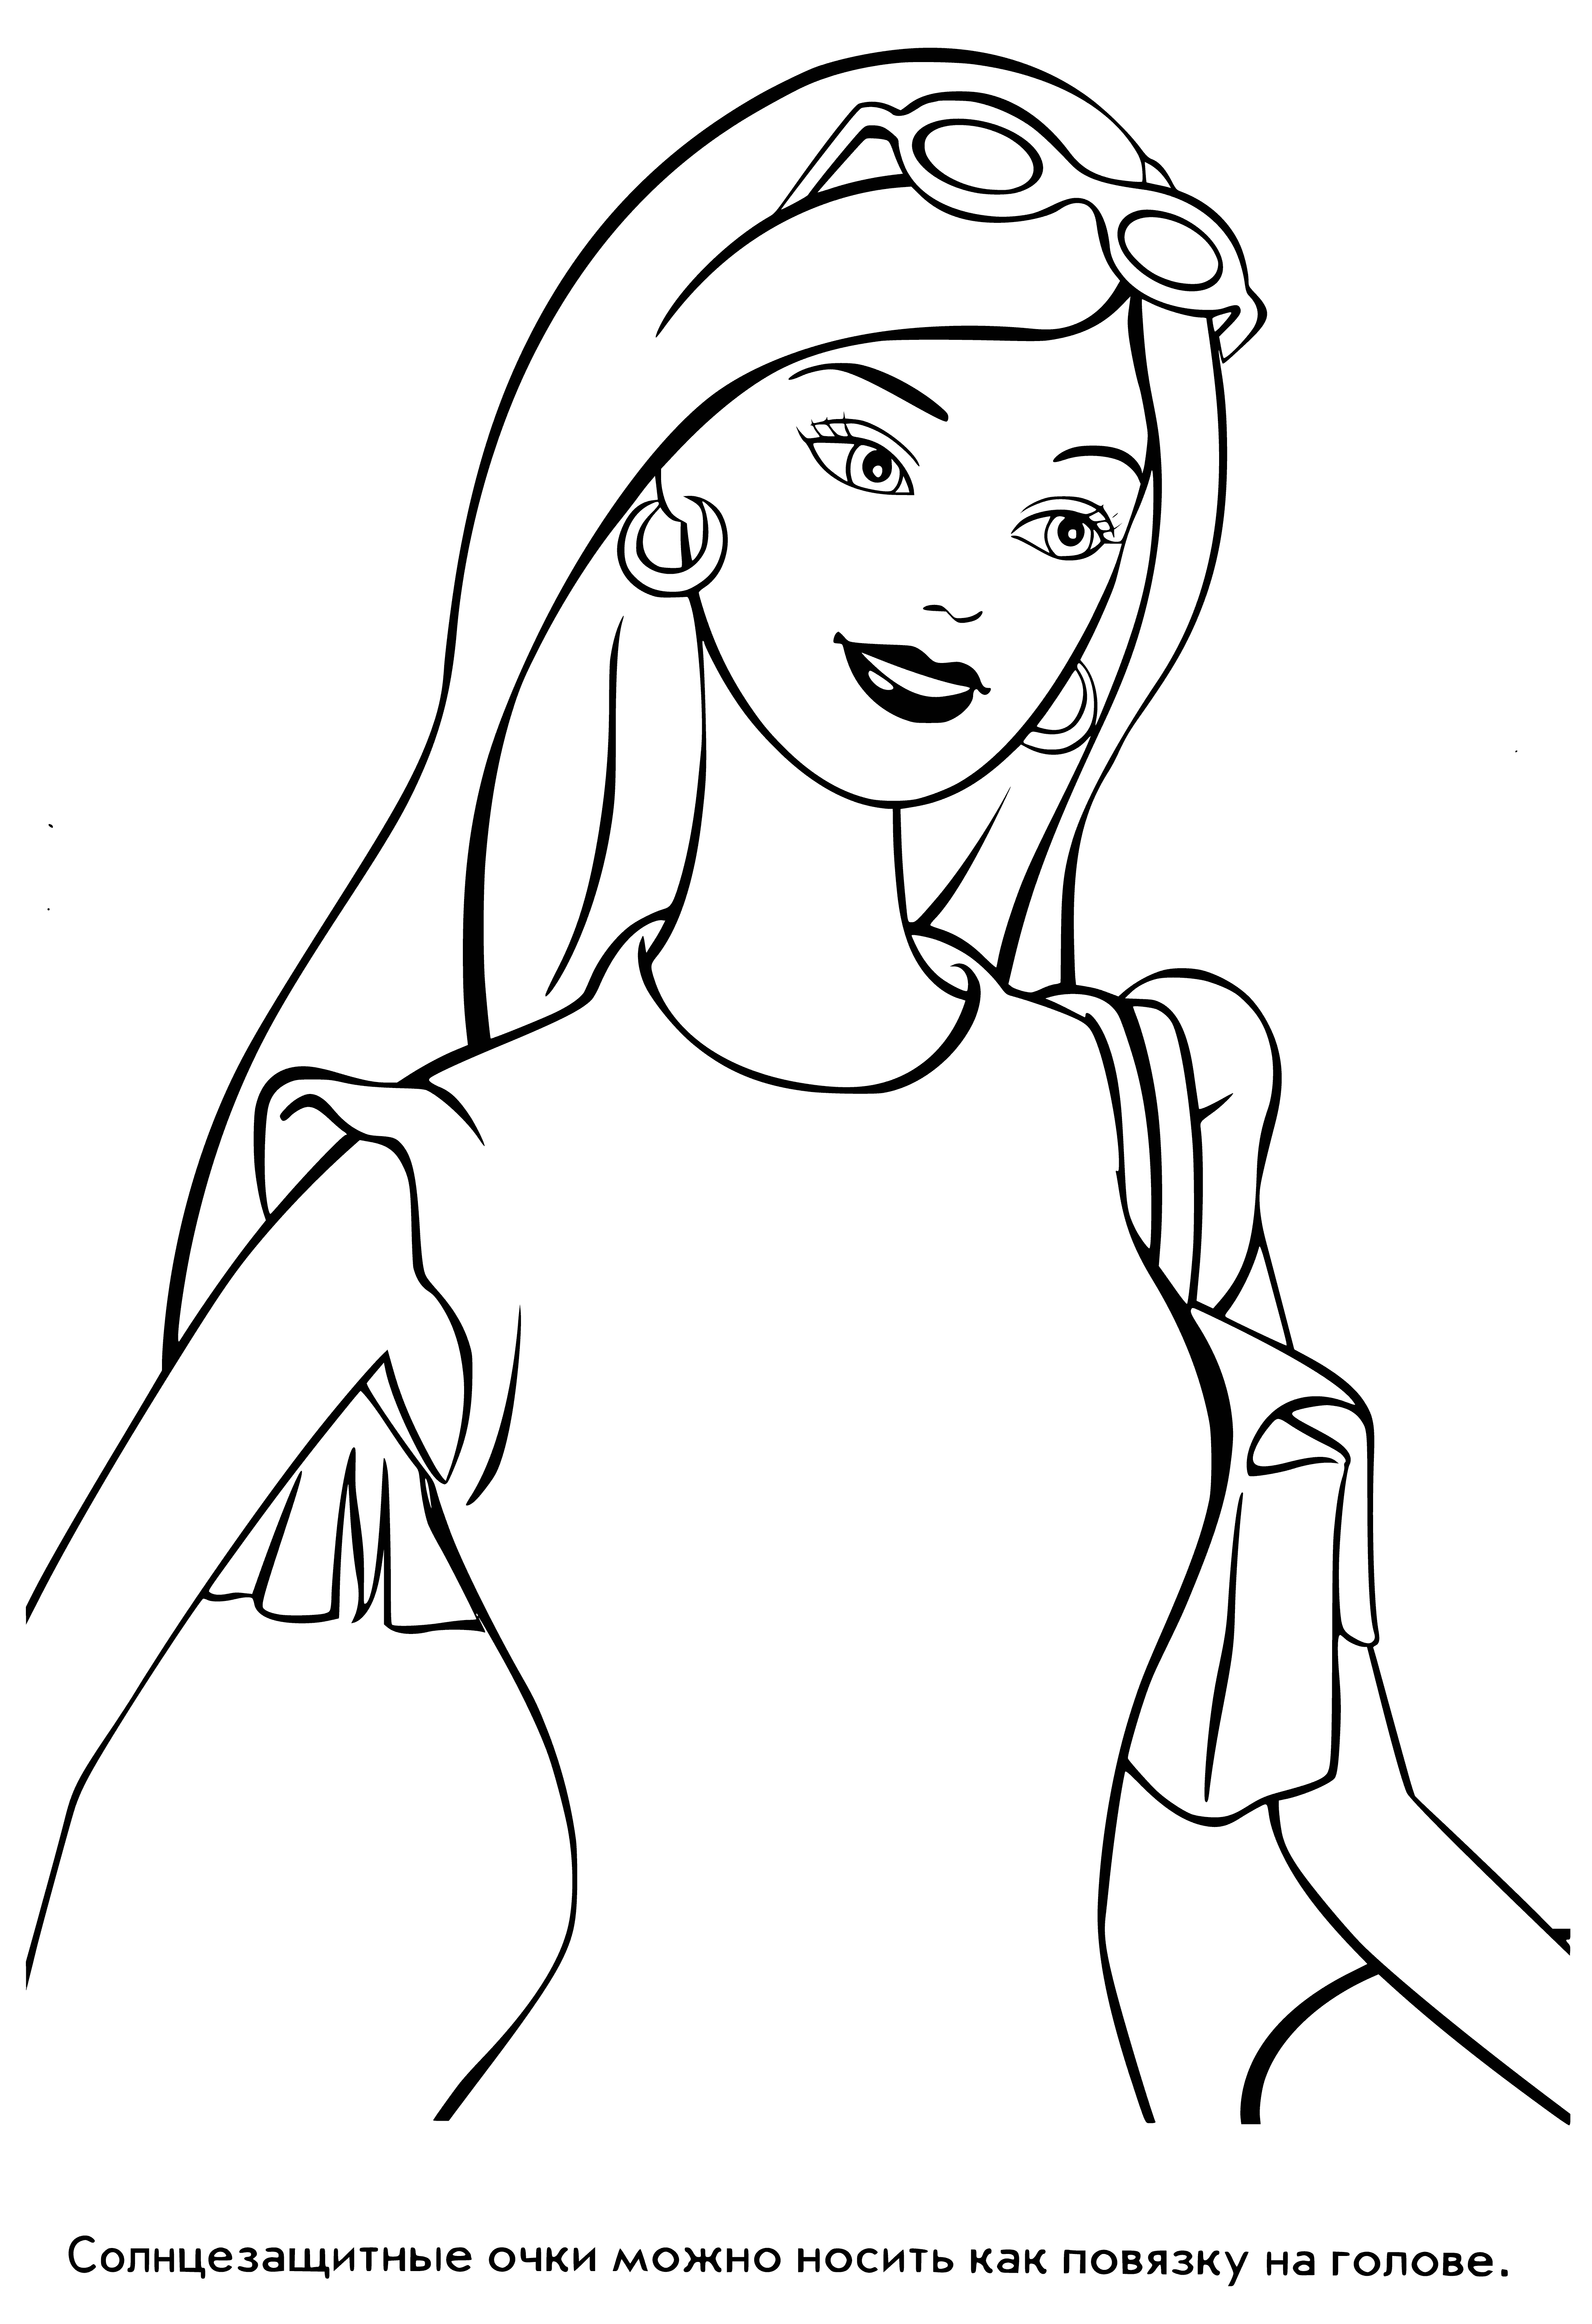 coloring page: Barbie wears a blue & white dress, blue belt & heels, w/ blonde hair & blue eyes. She stands in front of a blue background. #Barbie